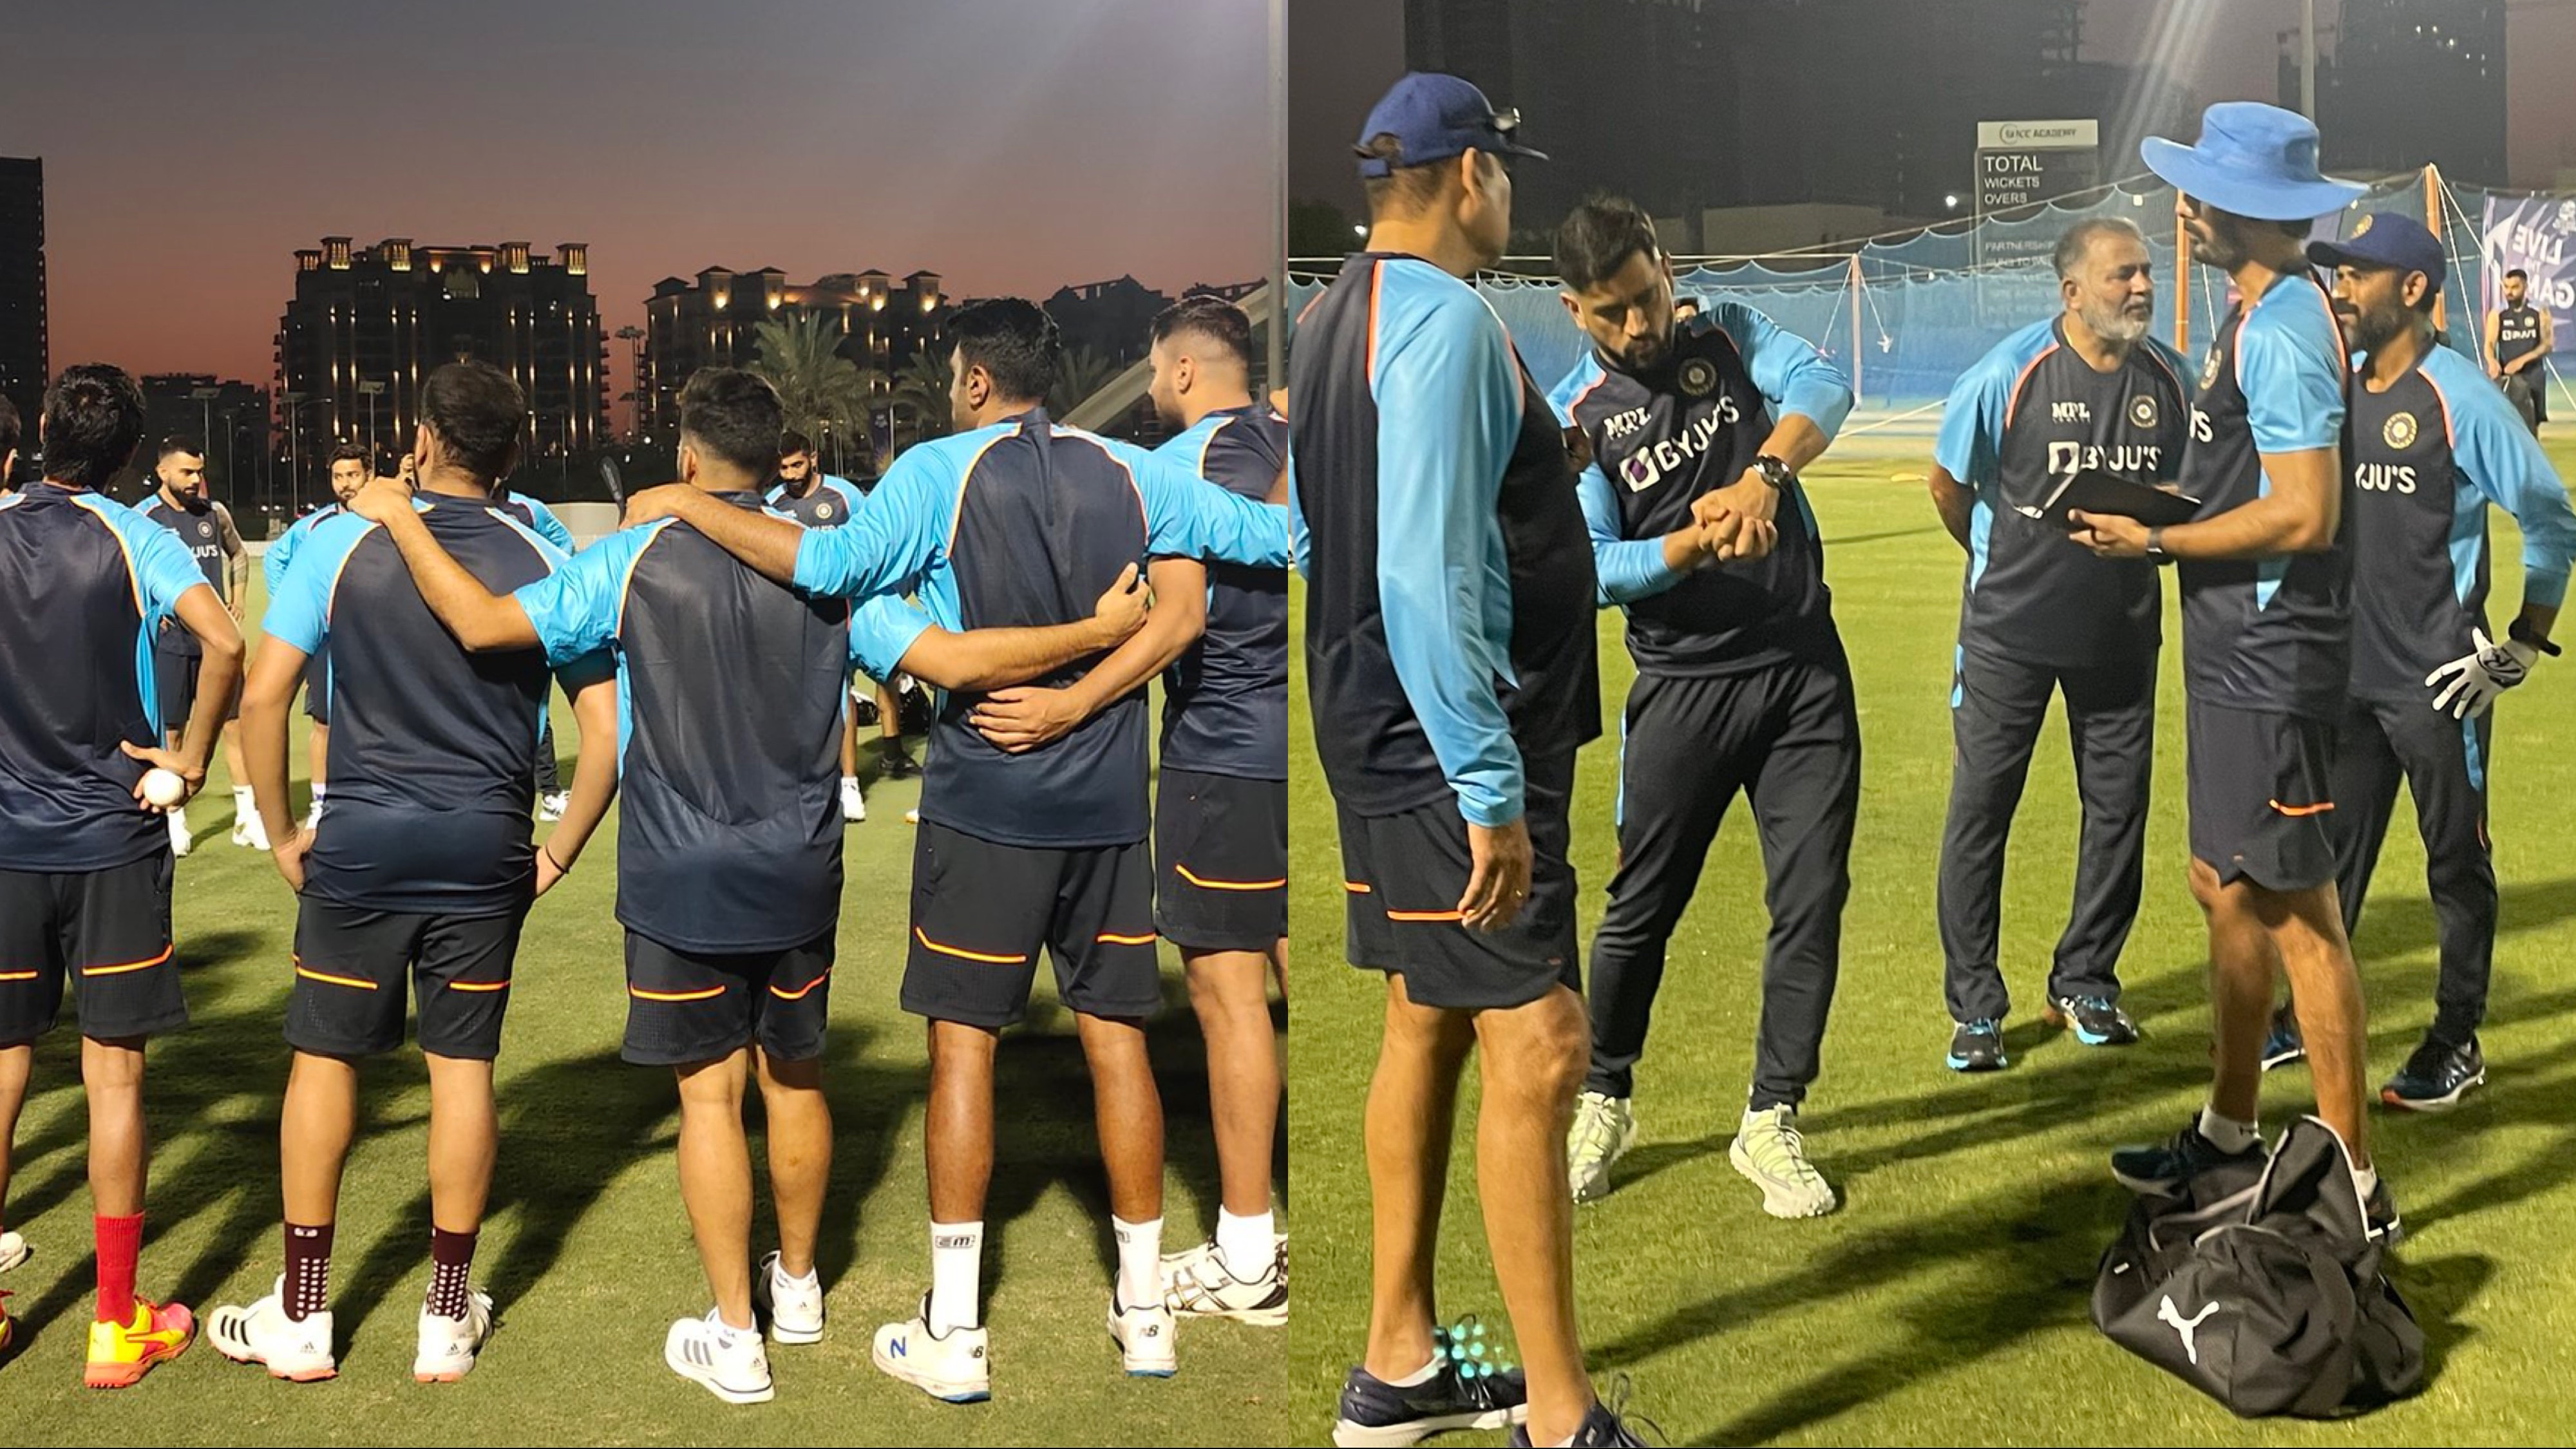 T20 World Cup 2021: PICS - 'Mentor' MS Dhoni joins Indian team at first net session in Dubai